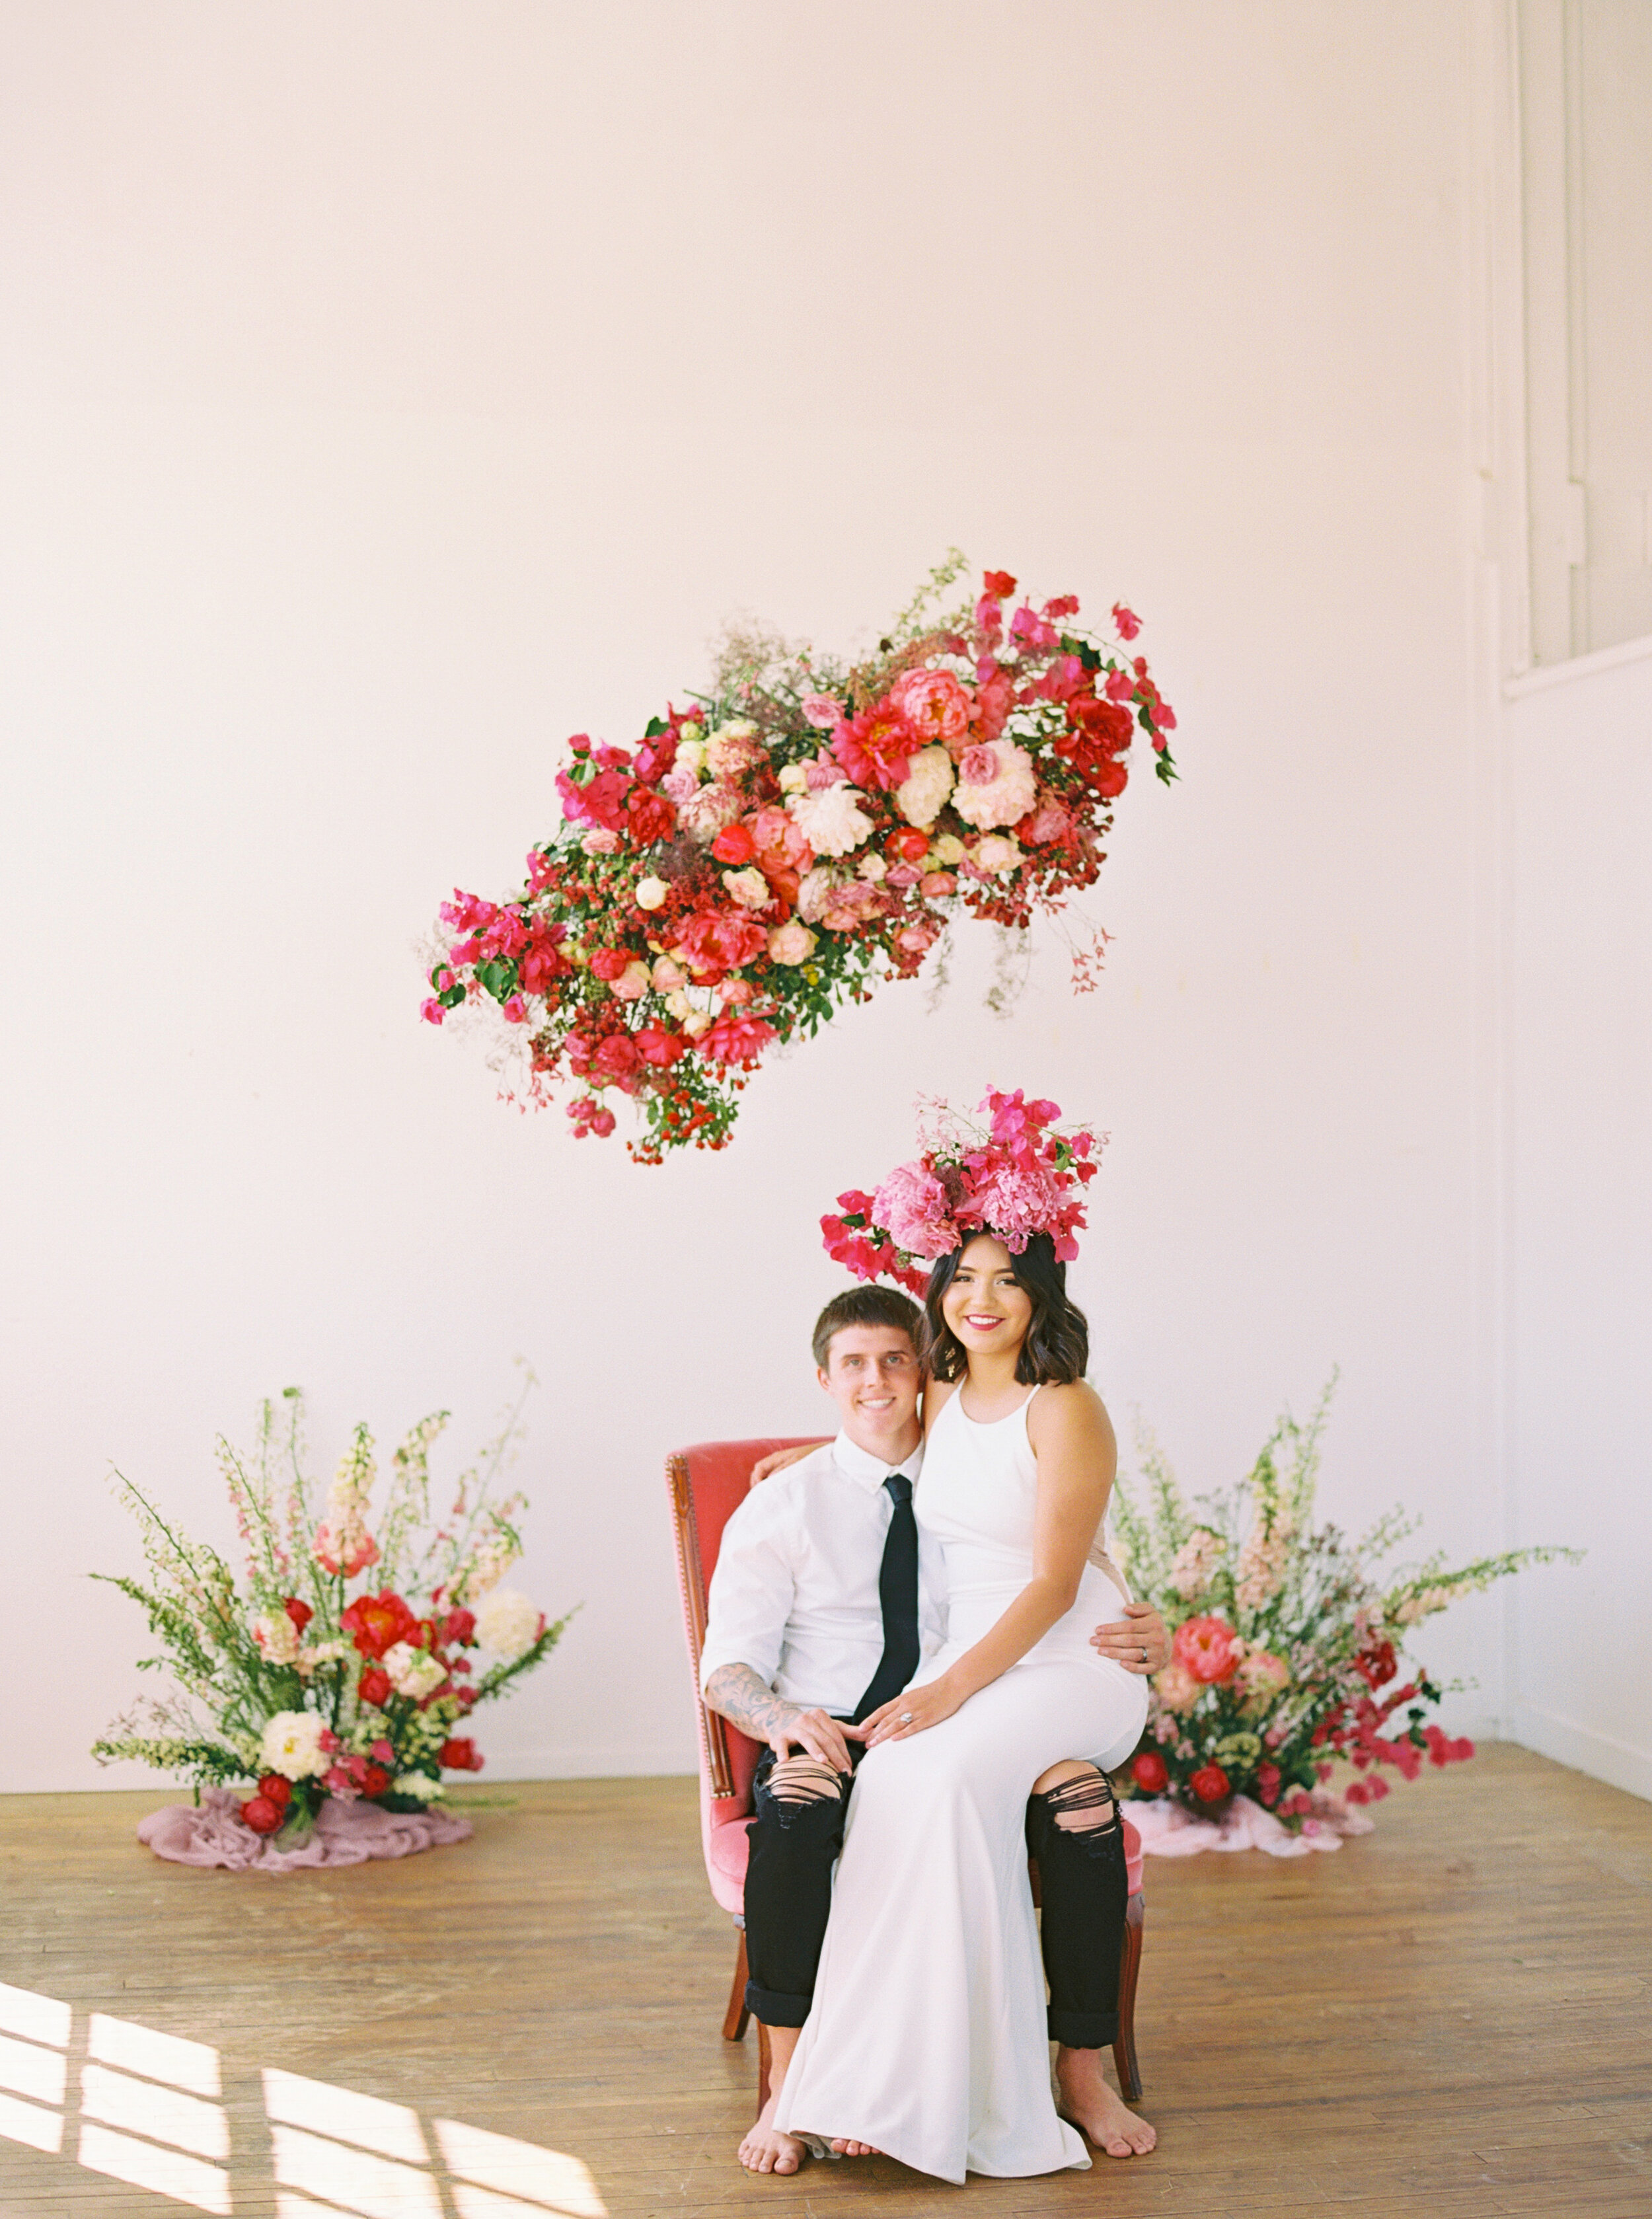 A Romantic Wedding Elopement Filled with Colorful Fuchsia - Sarahi Hadden Submission-13.jpg